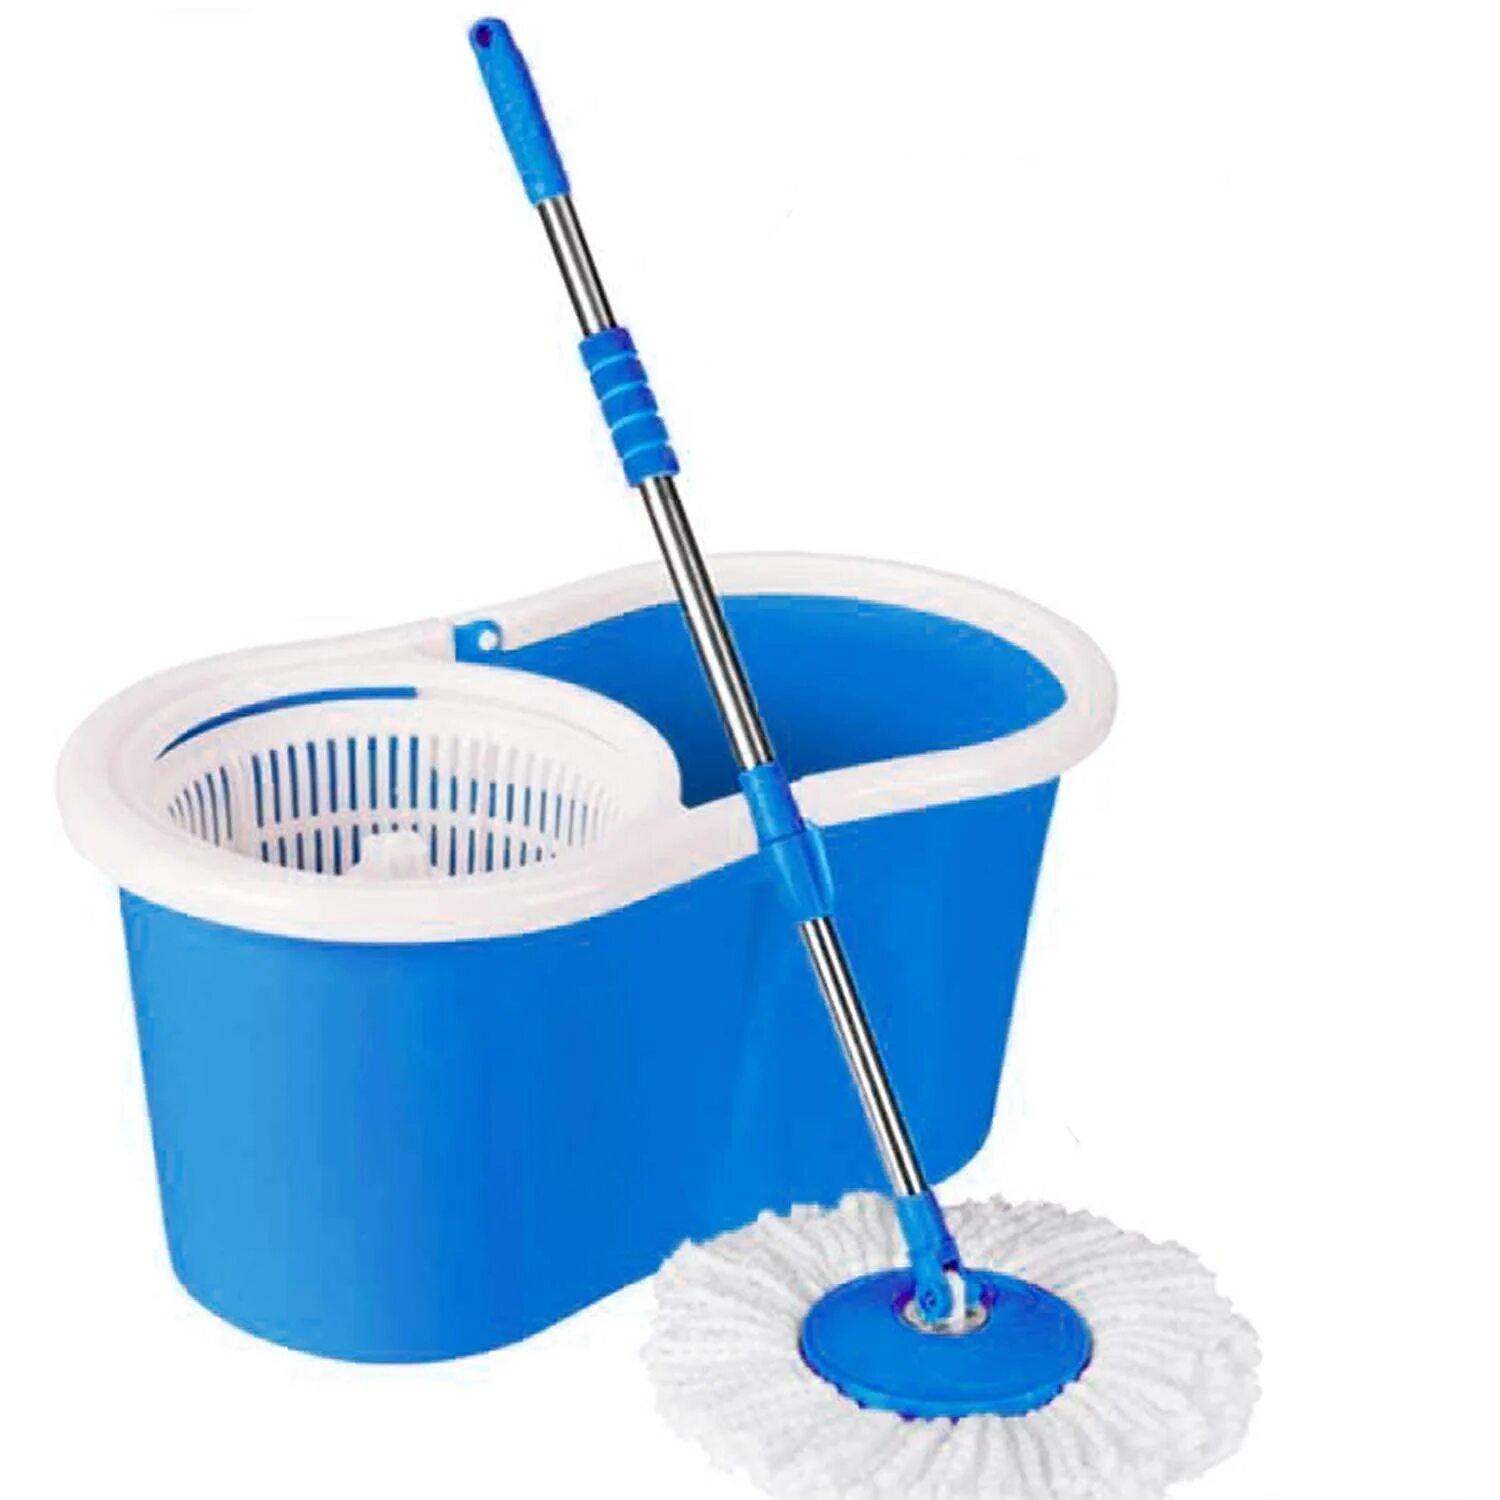 Швабра Spin Mop 360. Mop with Bucket. Швабра синяя. Spin Mop efficient Dynamics.